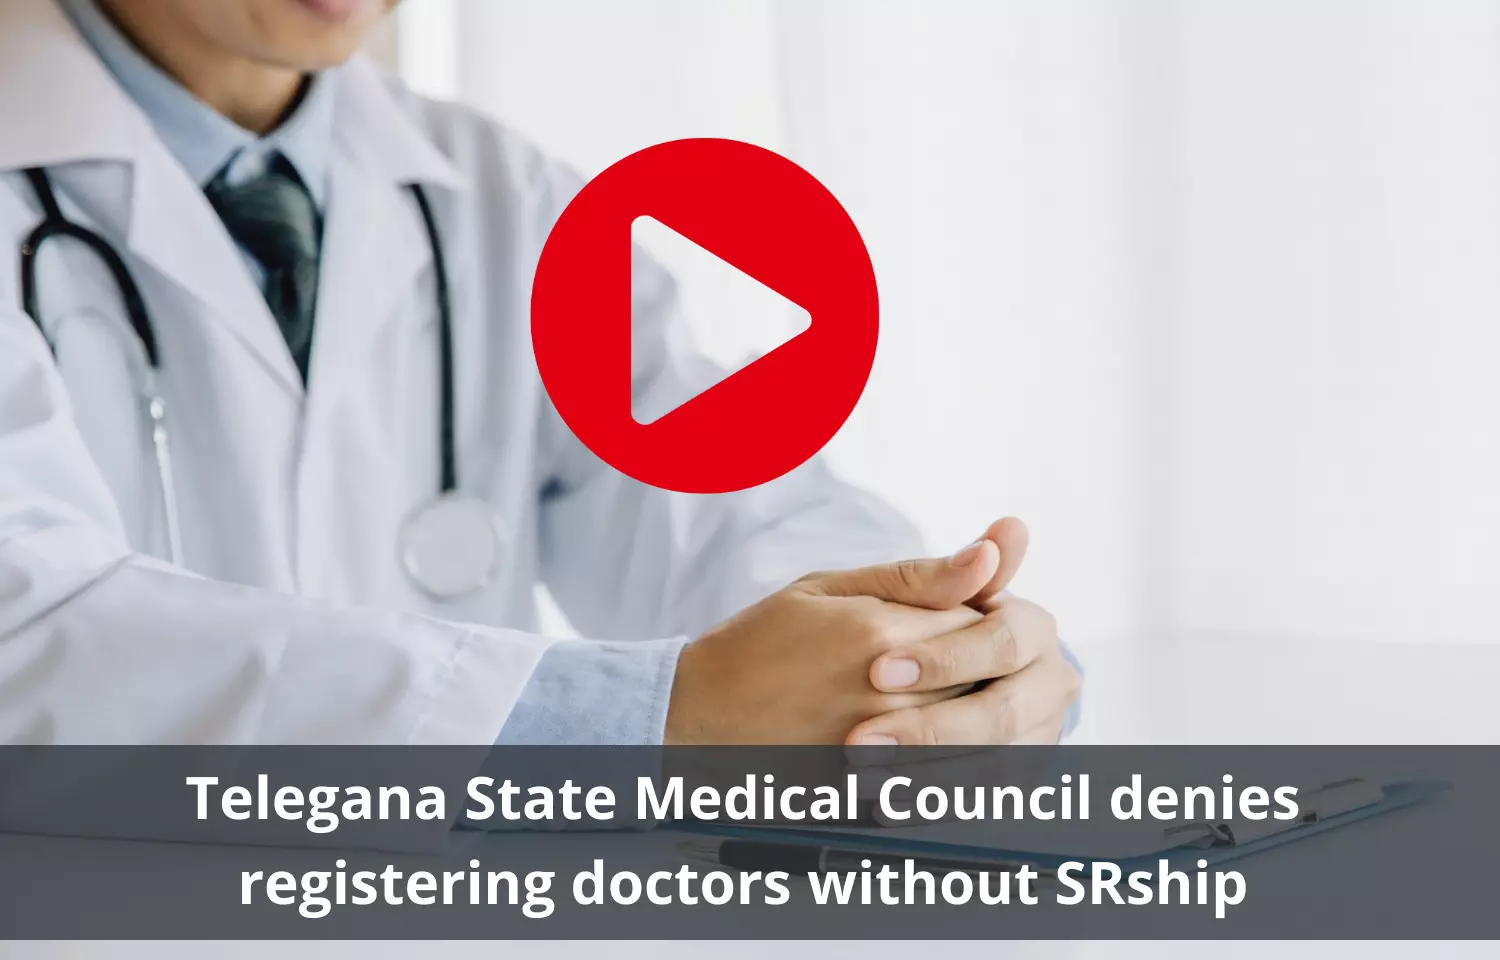 Telegana State Medical Council denies registering doctors without SRship